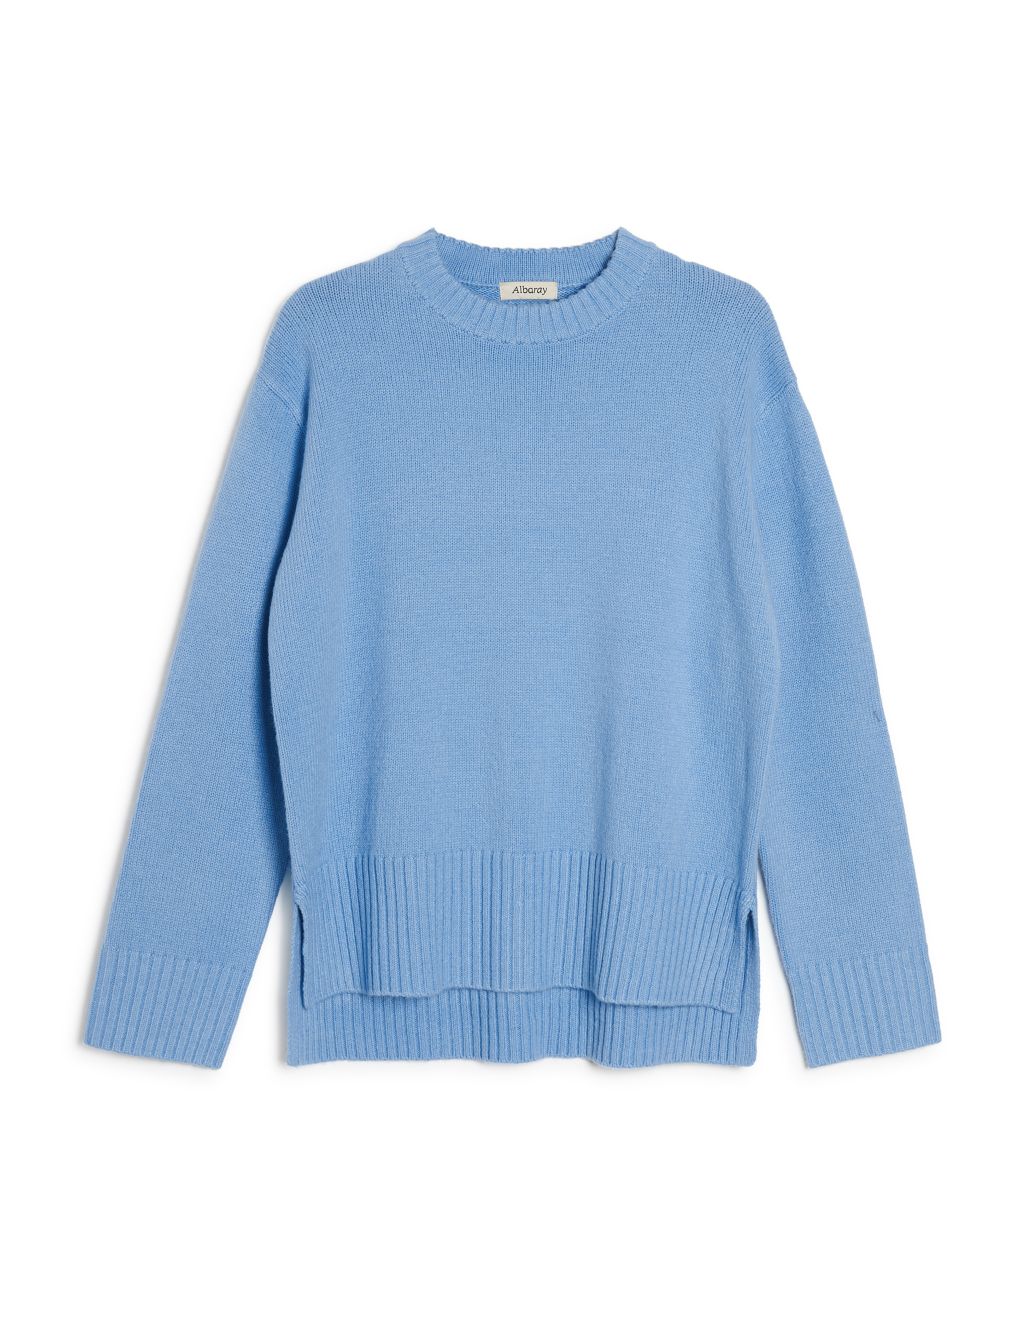 Crew Neck Stepped Hem Jumper with Wool image 2